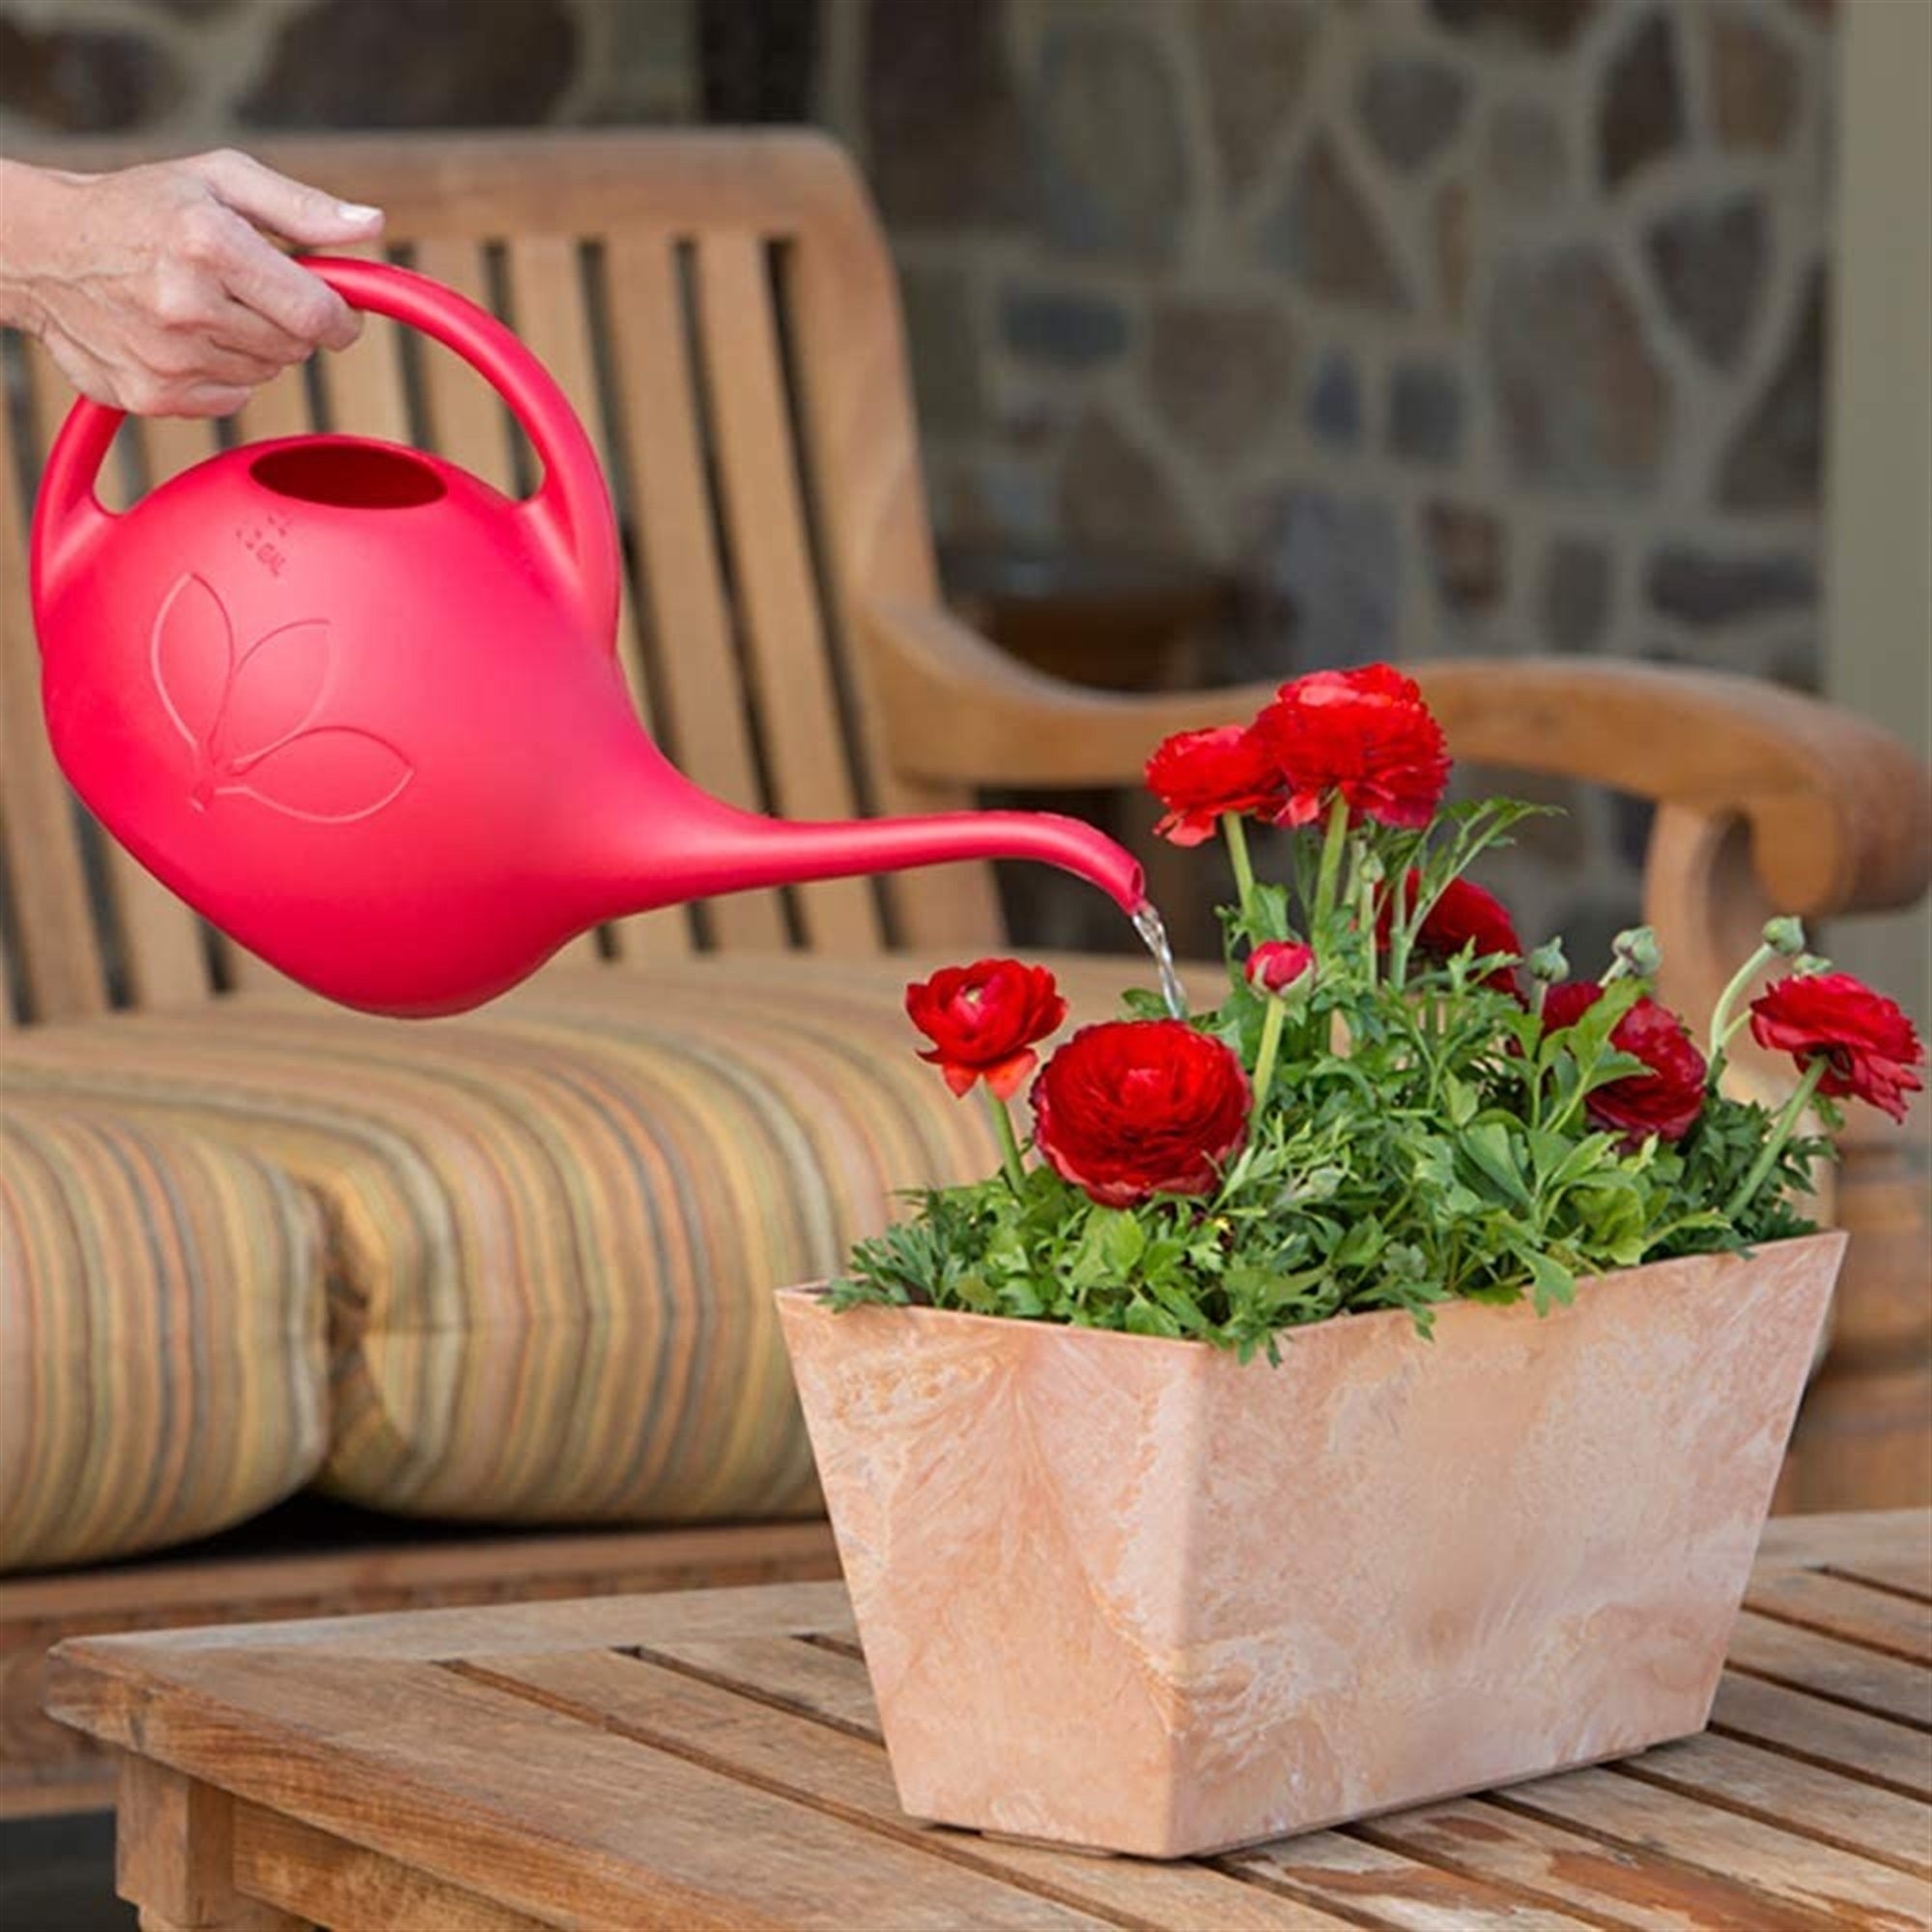 Novelty Indoor Plastic Long Spout Watering Can, Red, 0.5 Gallon